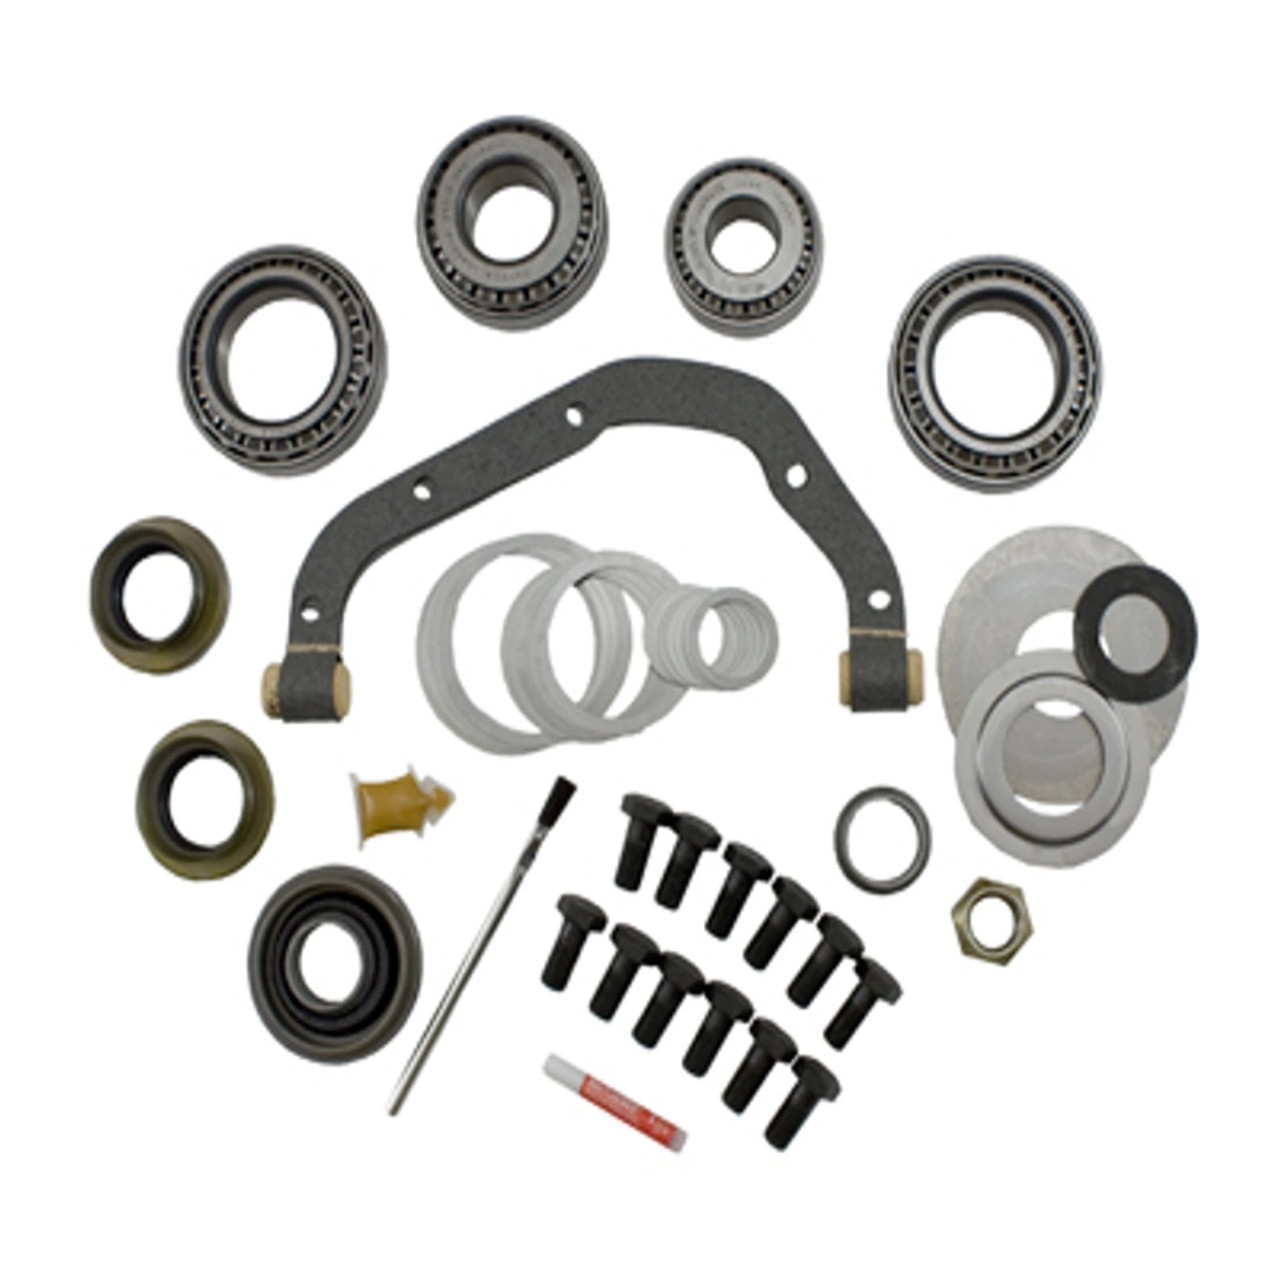 Toyota 8" Differential Master Install kit with Crush Pinion Spacer- Yukon YK T8-A